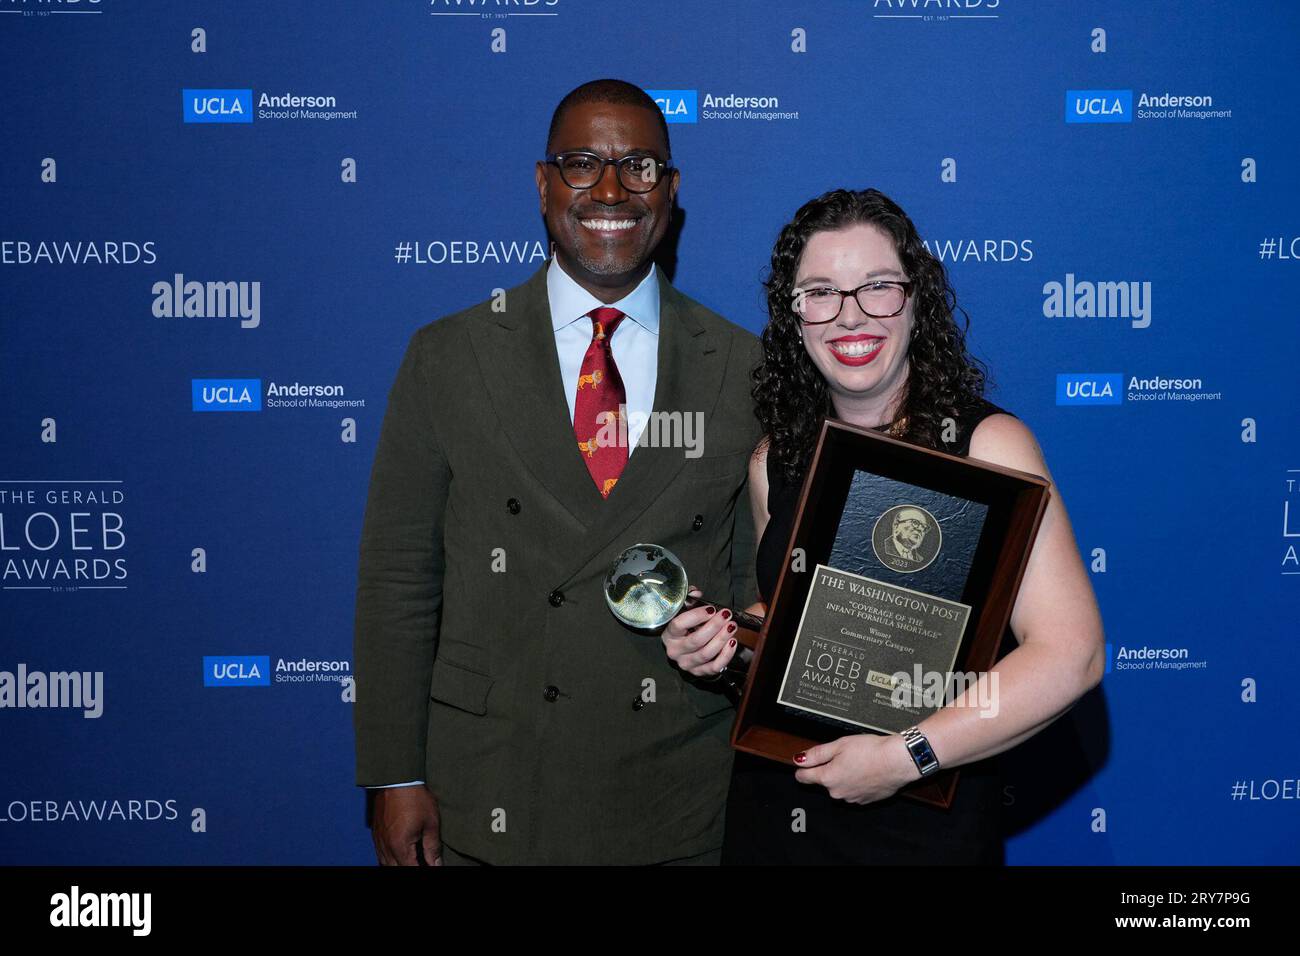 New York, United States. 28th Sep, 2023. New York, New York. Thursday September 28, 2023. Romaine Bostick, Alyssa Rosenberg during 2023 Gerald Loeb Awards hosted by UCLA Anderson School of Business, held at Capitale in New York City, Thursday, September 28, 2023. Photo Credit: Jennifer Graylock/Alamy Live News Stock Photo